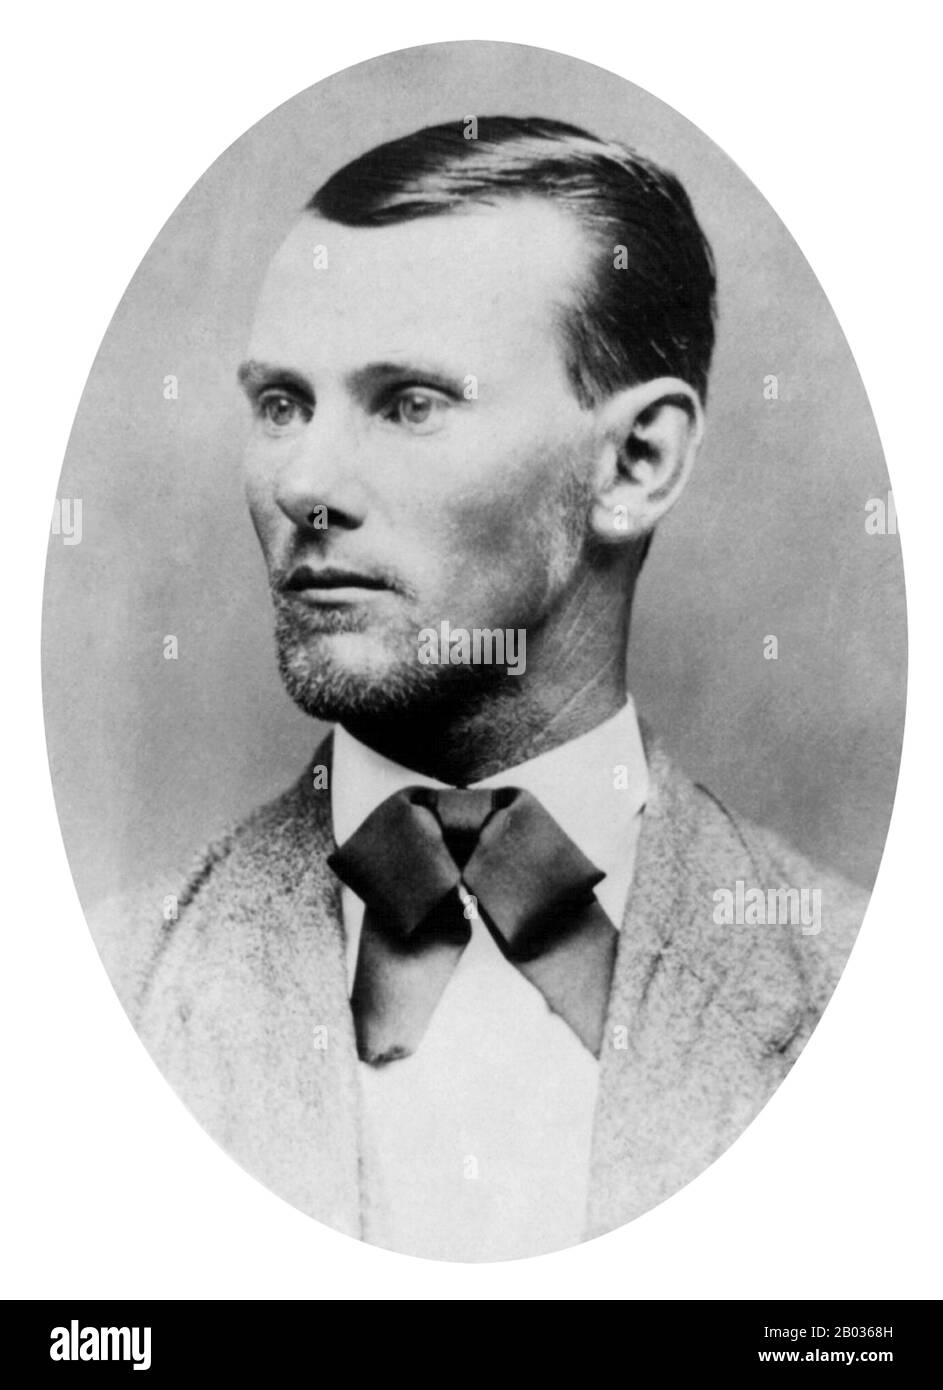 Jesse Woodson James (September 5, 1847 – April 3, 1882) was an American outlaw, guerrilla, gang leader, bank robber, train robber, and murderer from the state of Missouri and the most famous member of the James-Younger Gang.   Jesse and his brother Frank James were Confederate guerrillas during the Civil War. They were accused of participating in atrocities committed against Union soldiers, including the Centralia Massacre. After the war, as members of various gangs of outlaws, they robbed banks, stagecoaches, and trains.   On April 3, 1882, Jesse James was killed by Robert Ford, a member of h Stock Photo